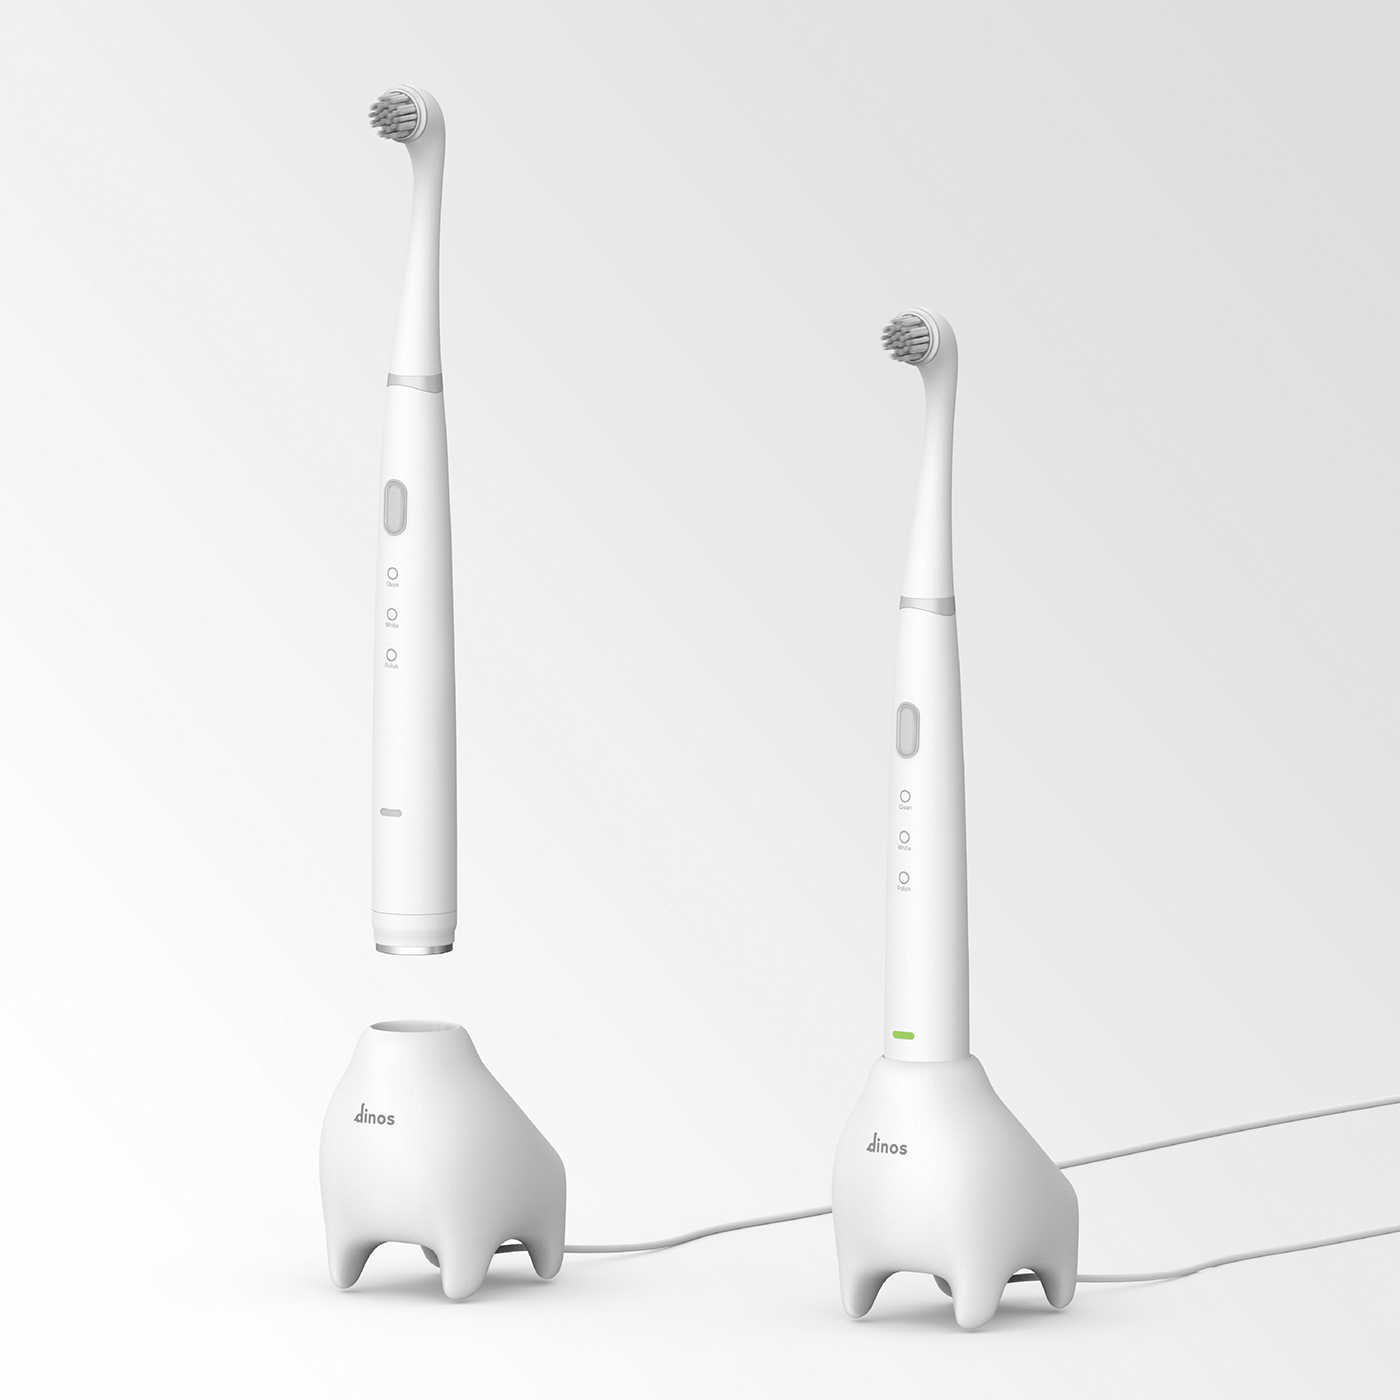 toothbrush product Emotional products product design  kidult color industrial human minimal simple